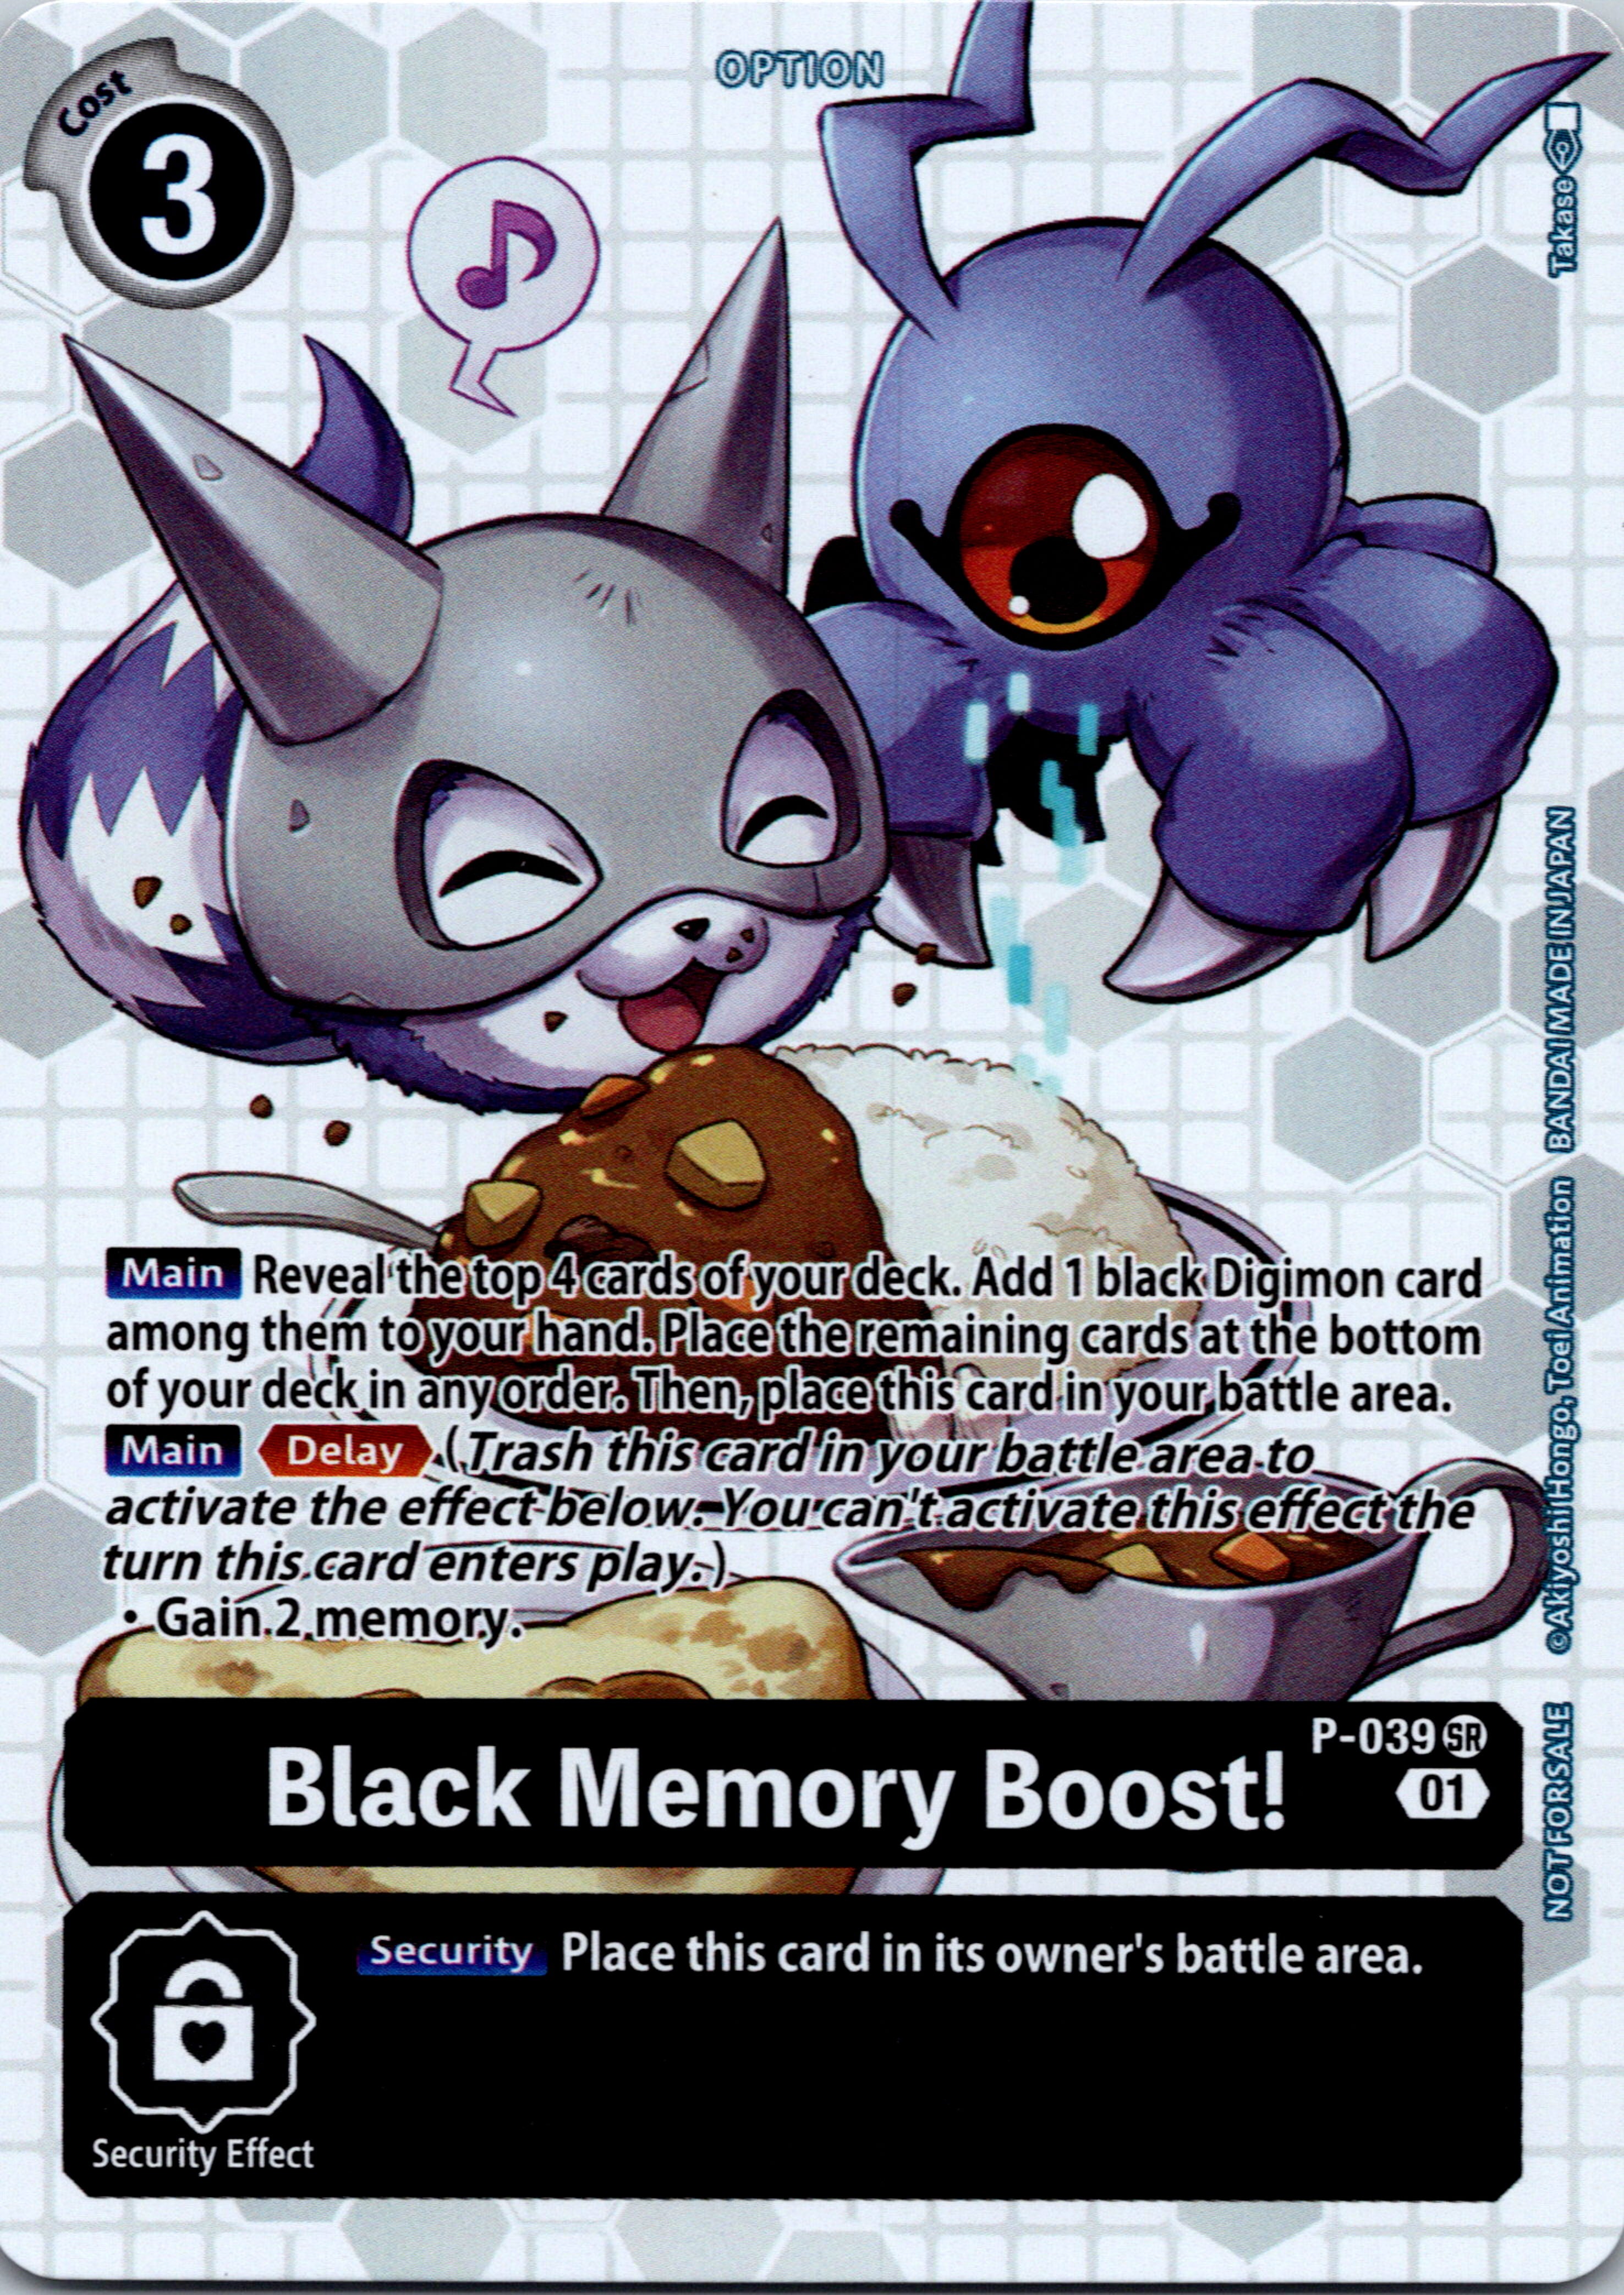 Black Memory Boost! - P-039 (Next Adventure Box Promotion Pack) [P-039] [Digimon Promotion Cards] Normal